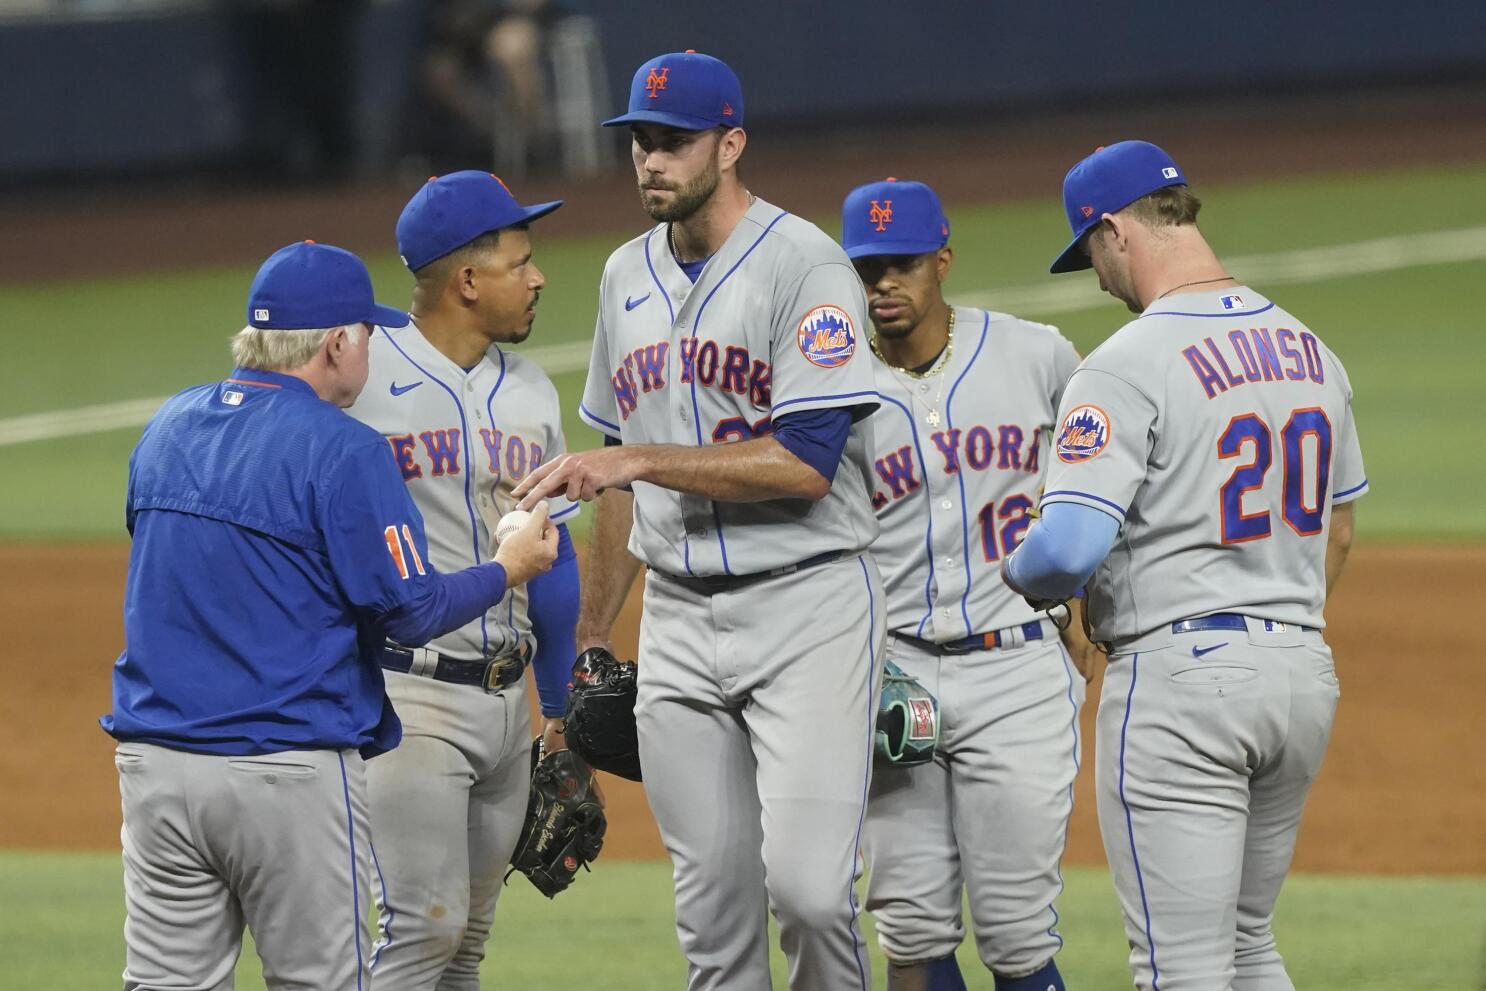 Mets' Pete Alonso off to slow start offensively